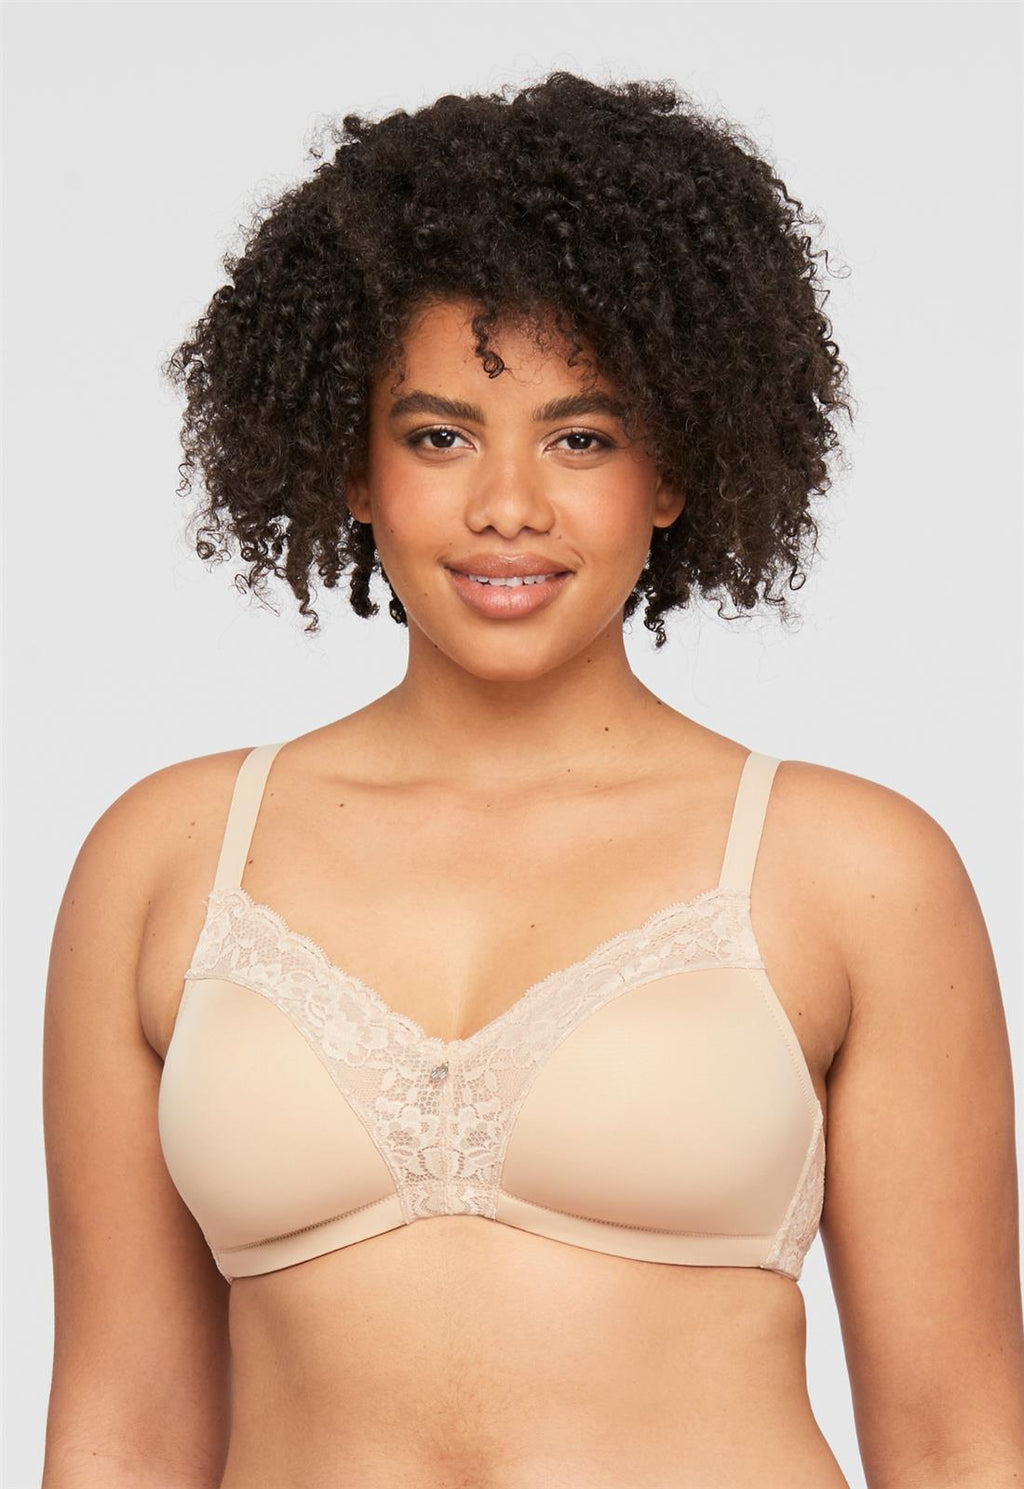 Discover Unmatched Bra Support with Montelle Intimates! - Montelle Intimates